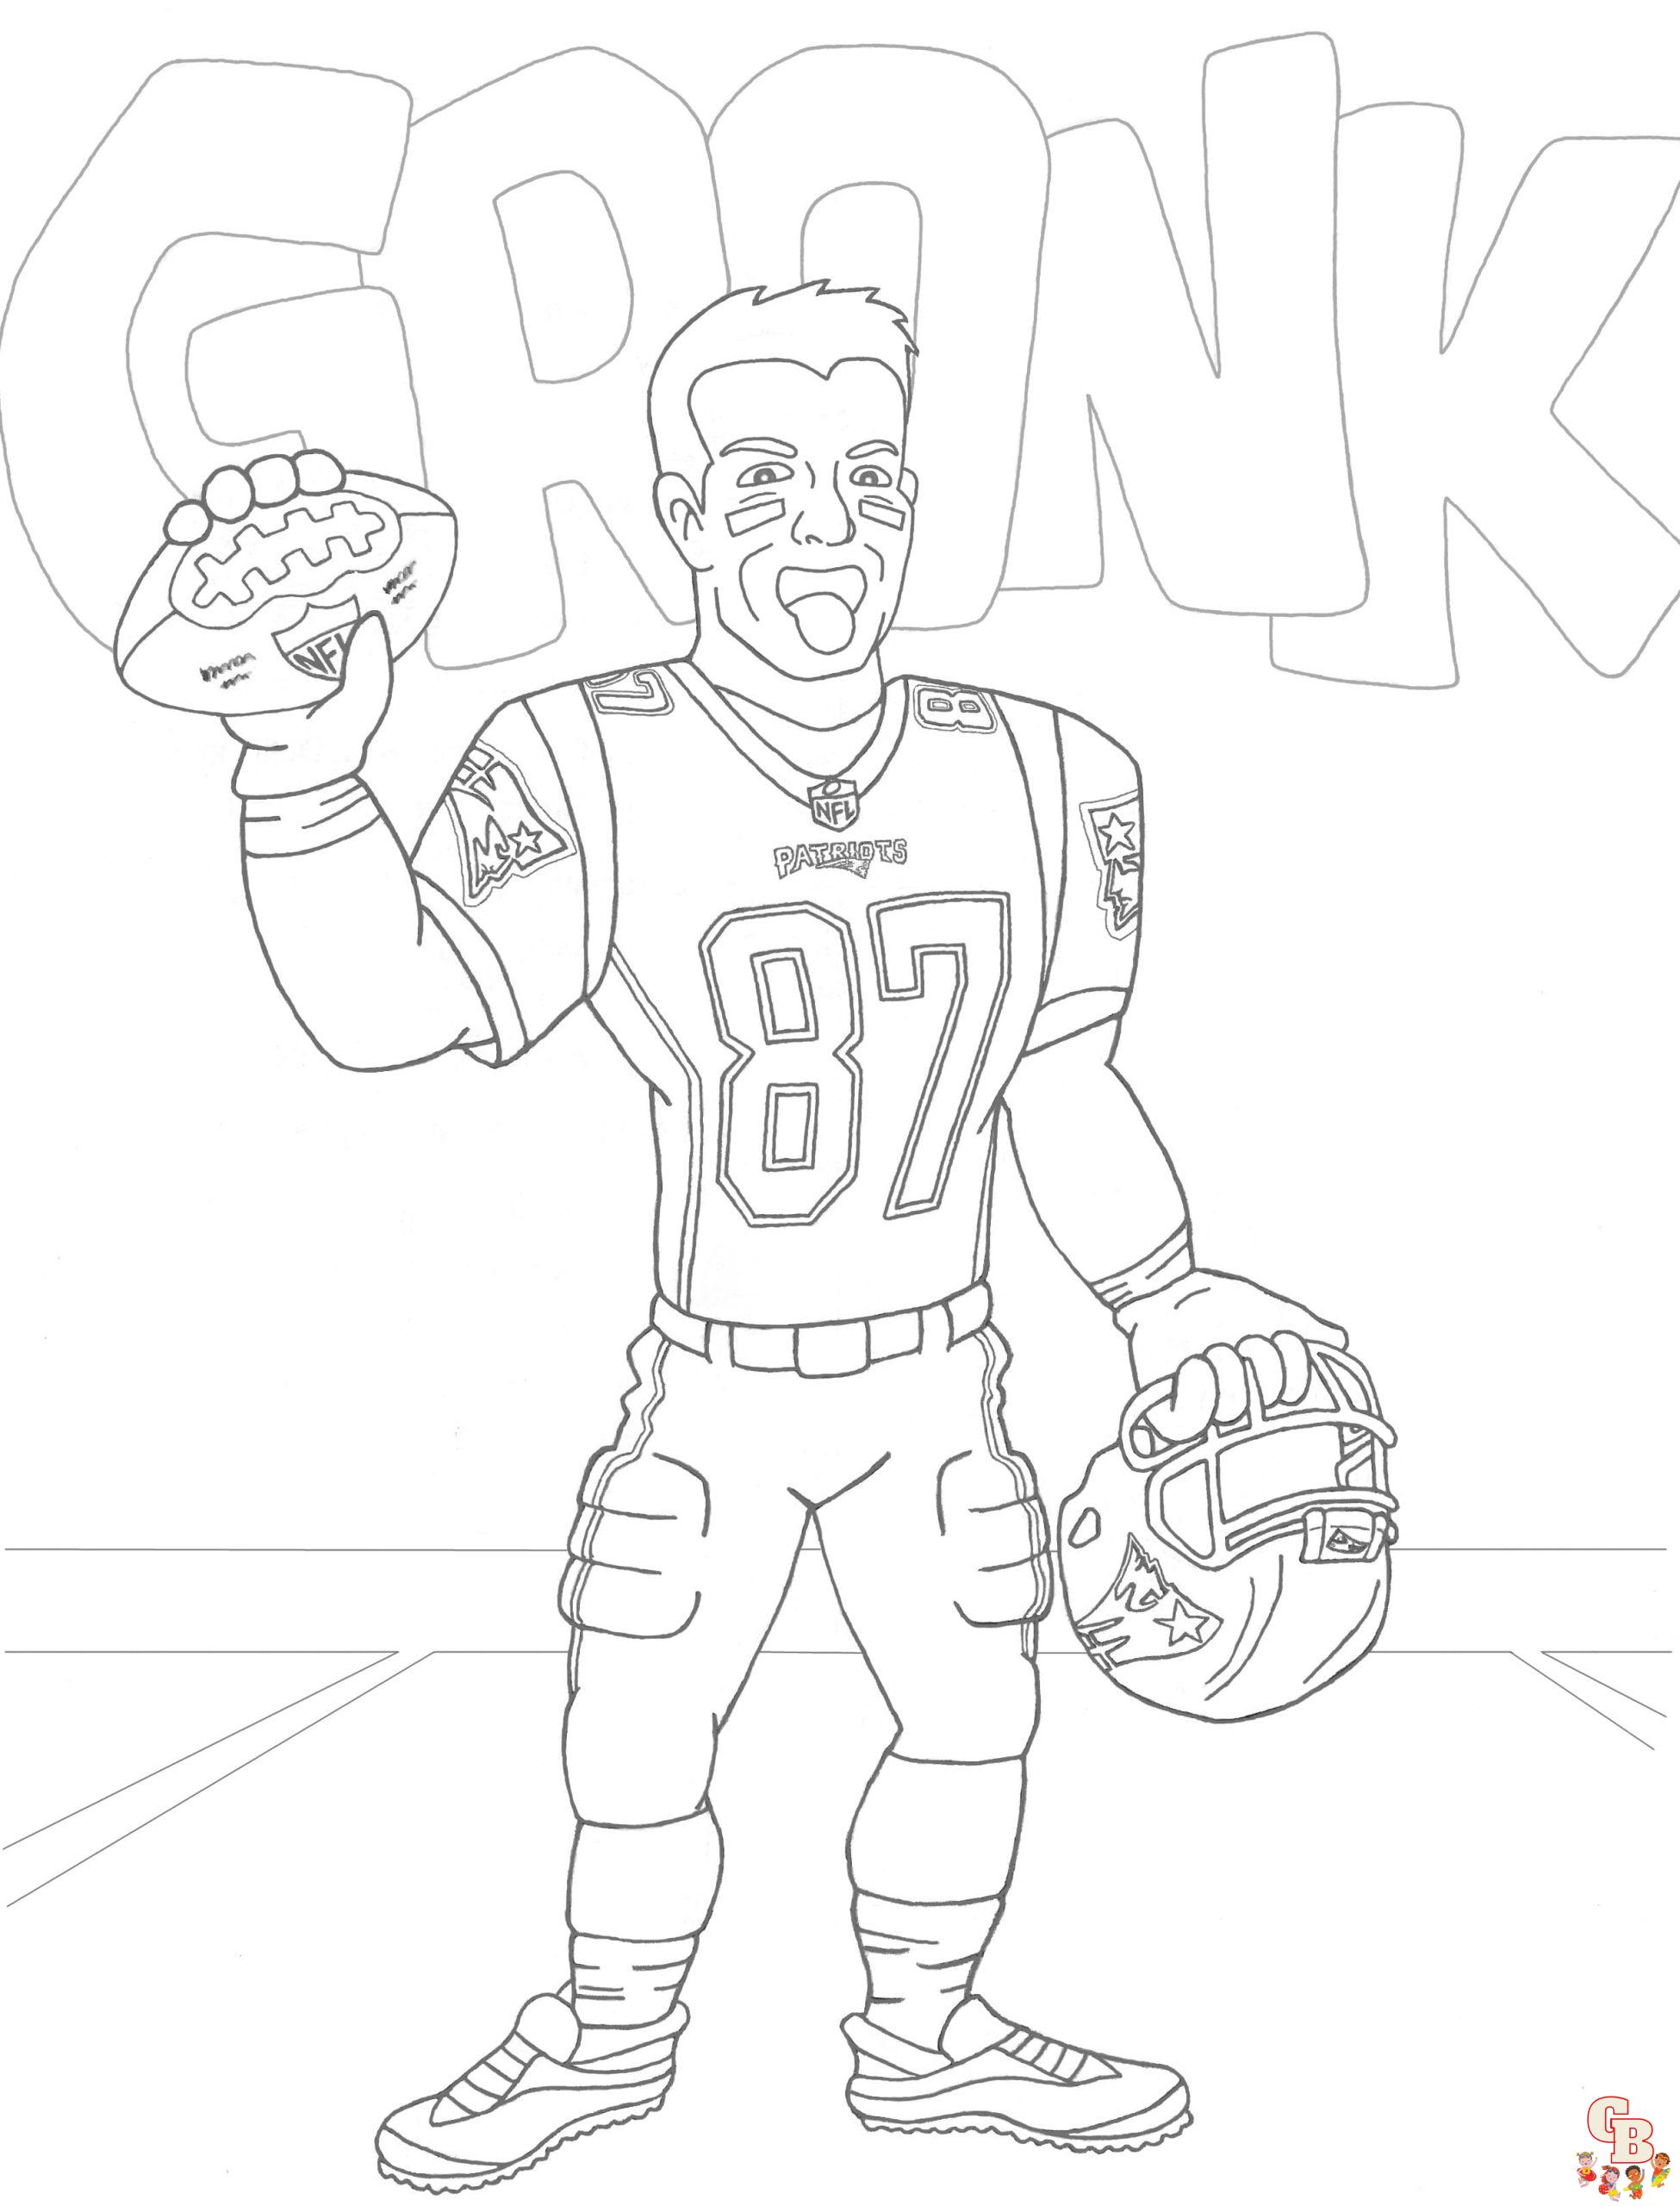 Patriot coloring pages to print